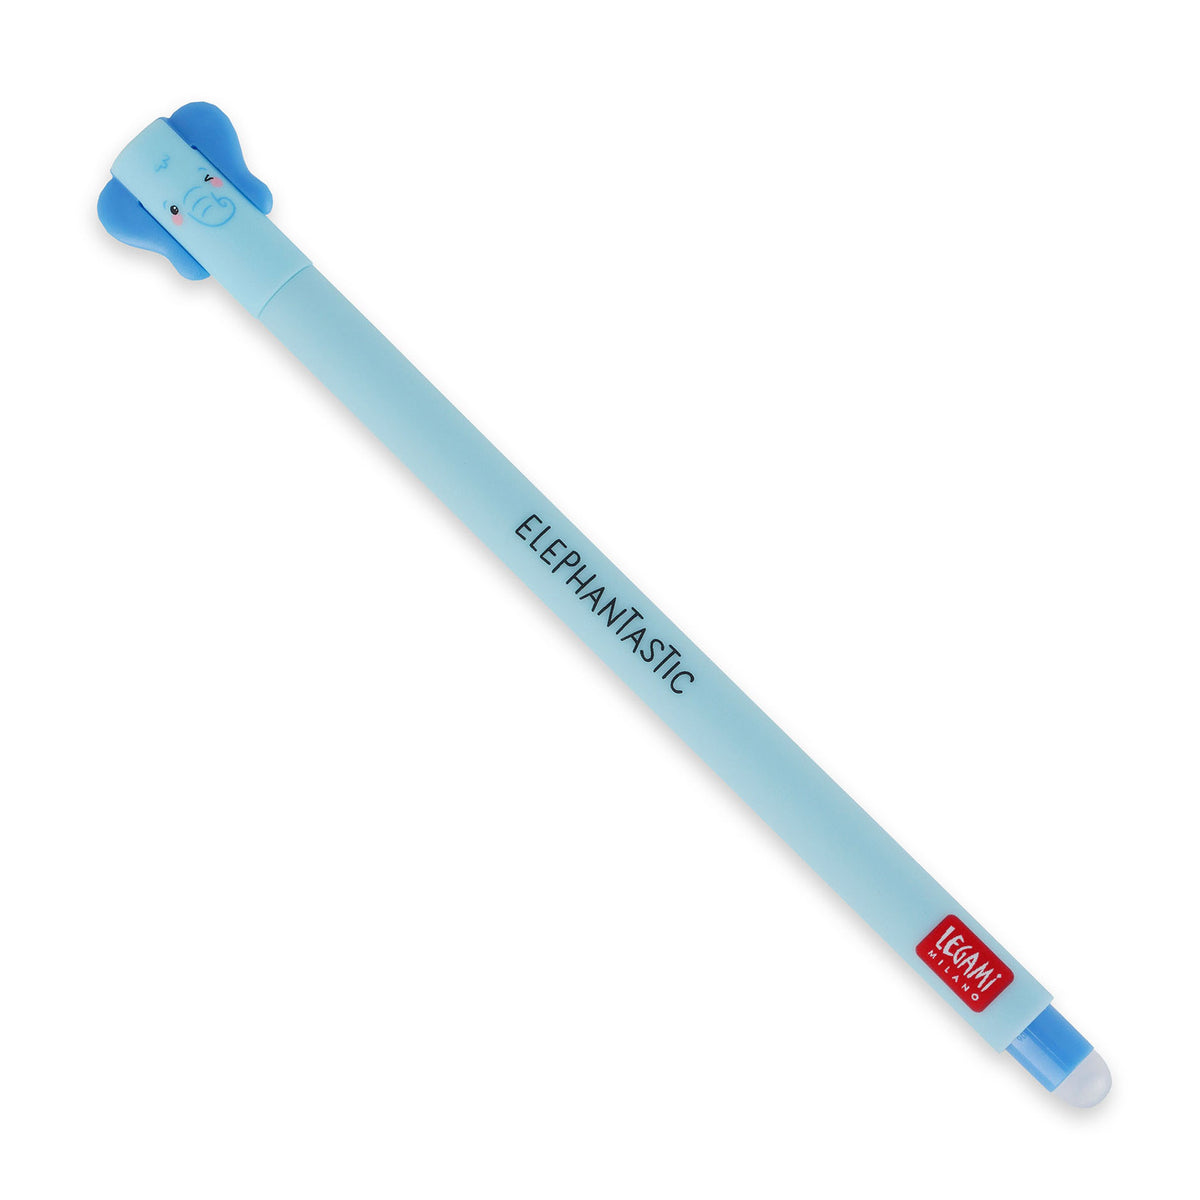 An image of a light blue coloured erasable pen by Legami. The cap of the pen is like the head of an elephant with elephant ears formed on the sides. It has an erasable ball at the other end of the pen.